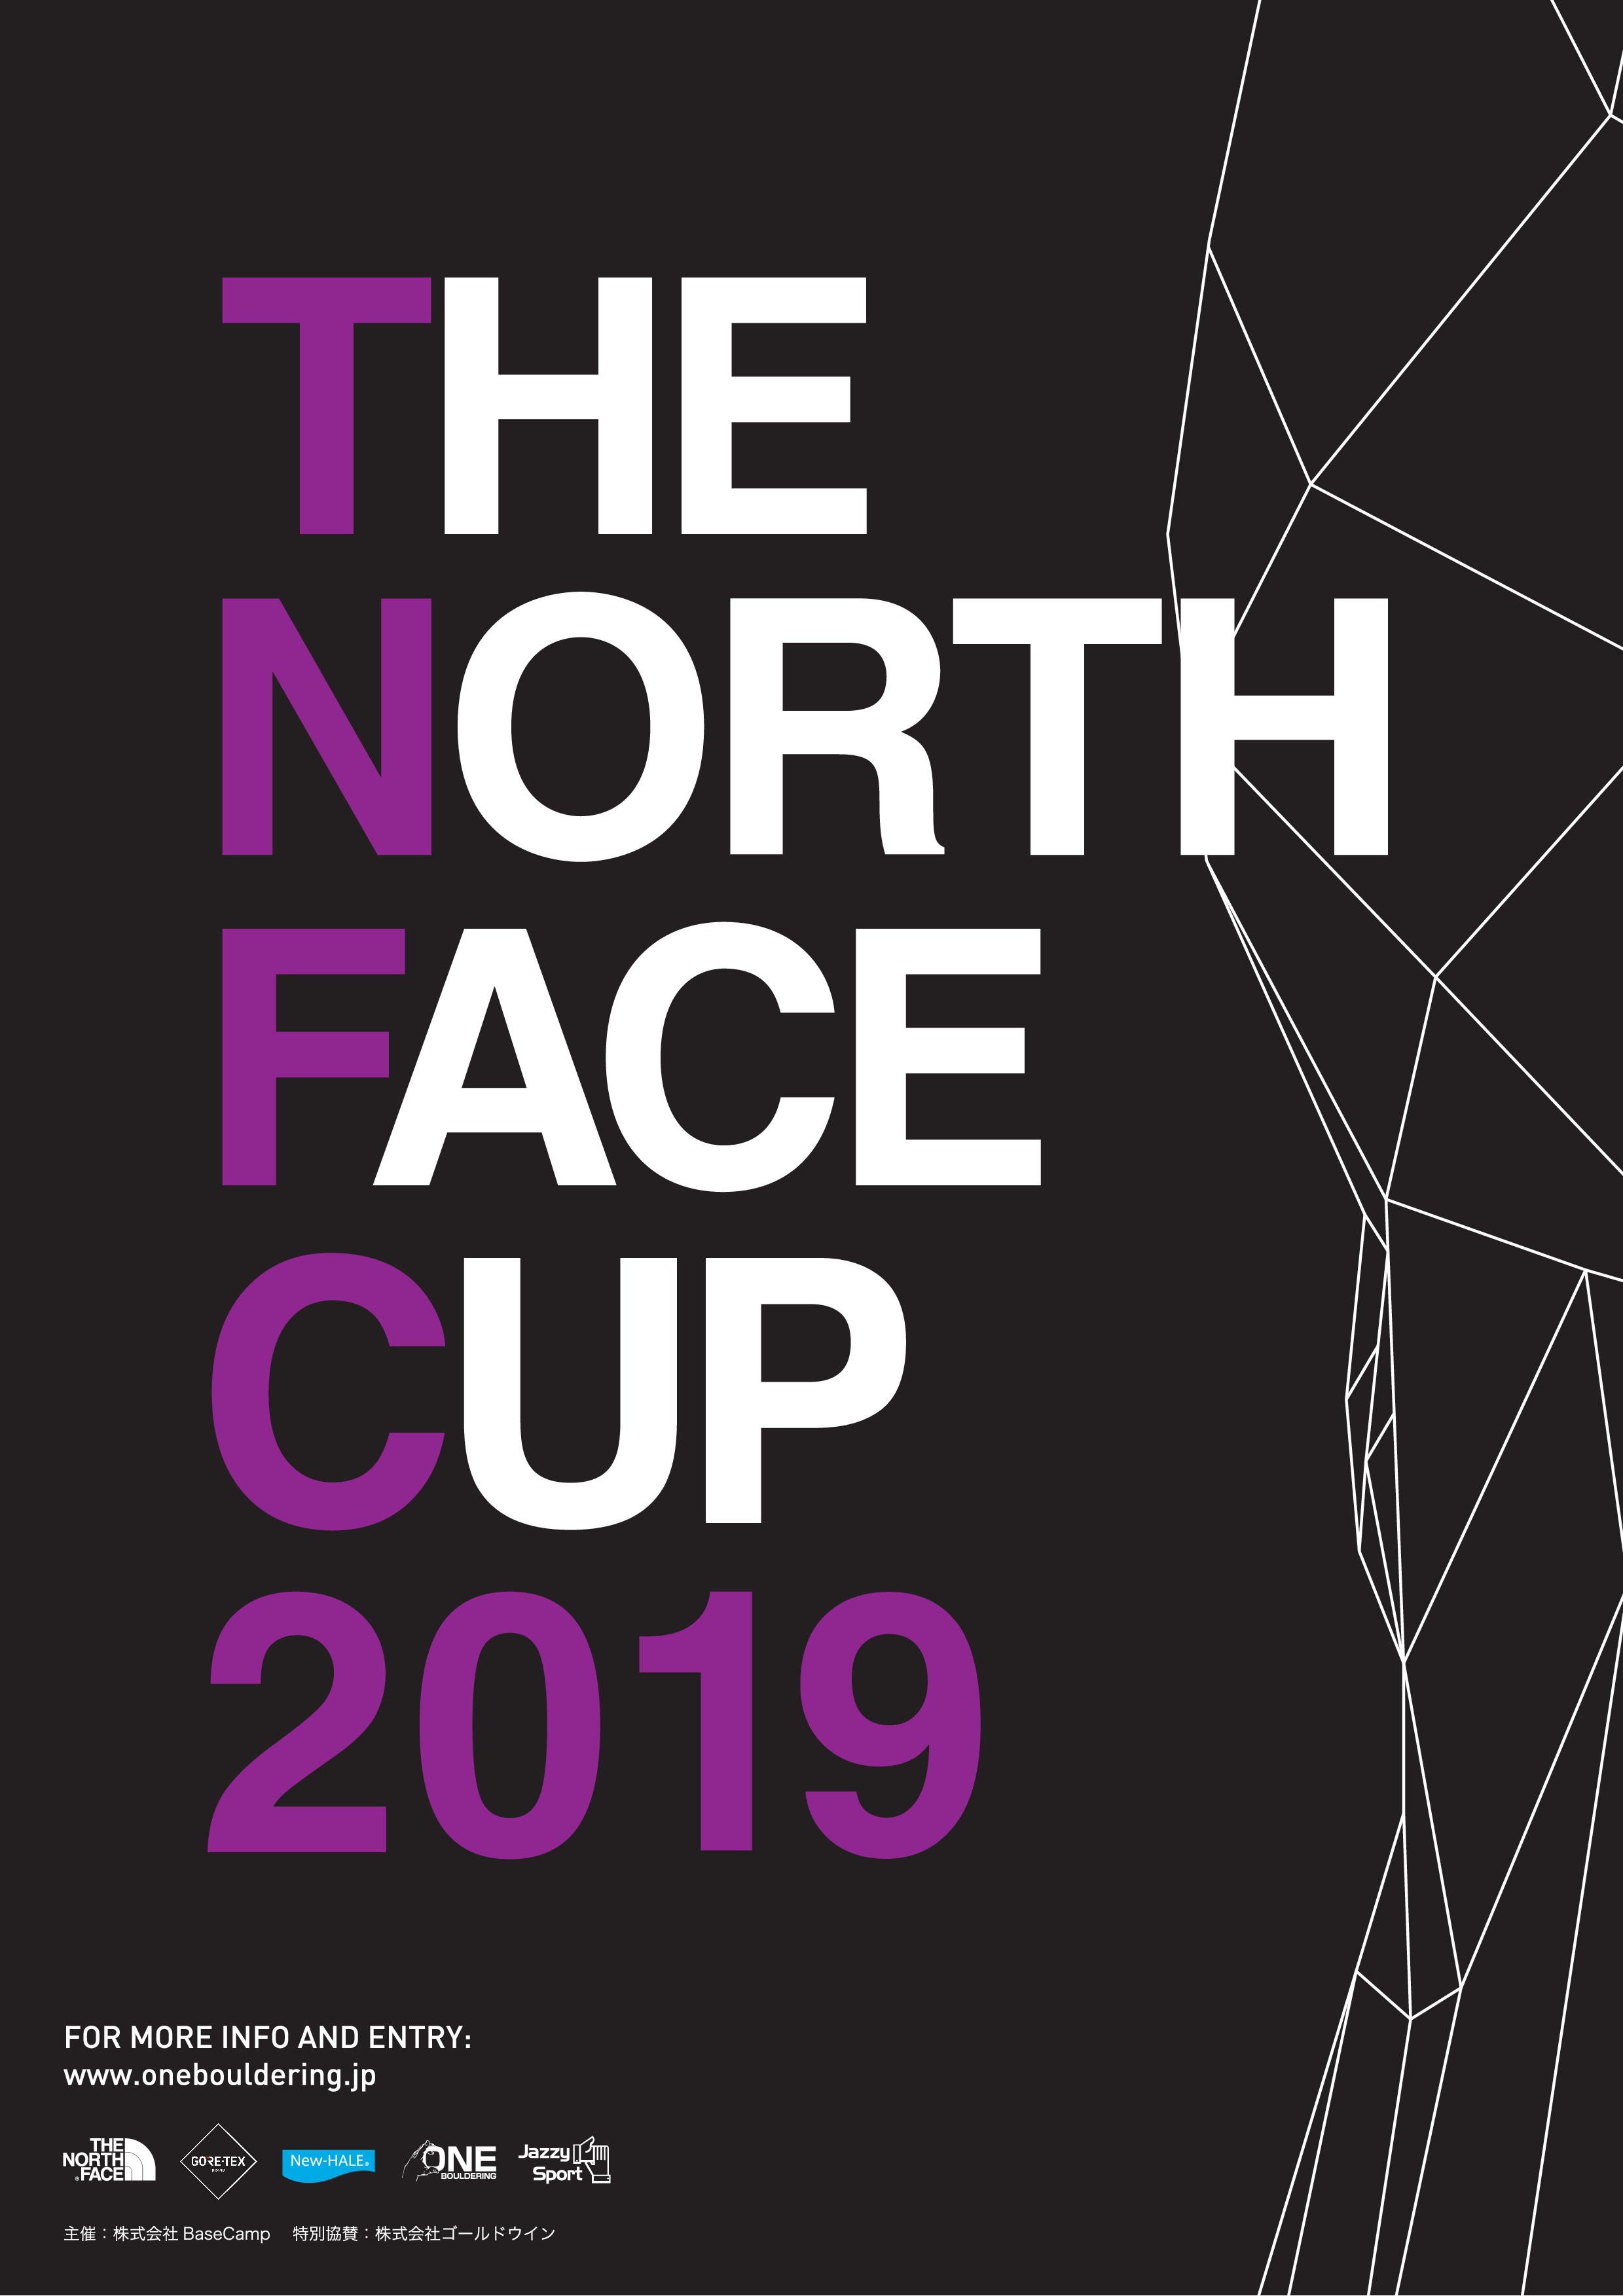 THE NORTH FACE CUP 2019